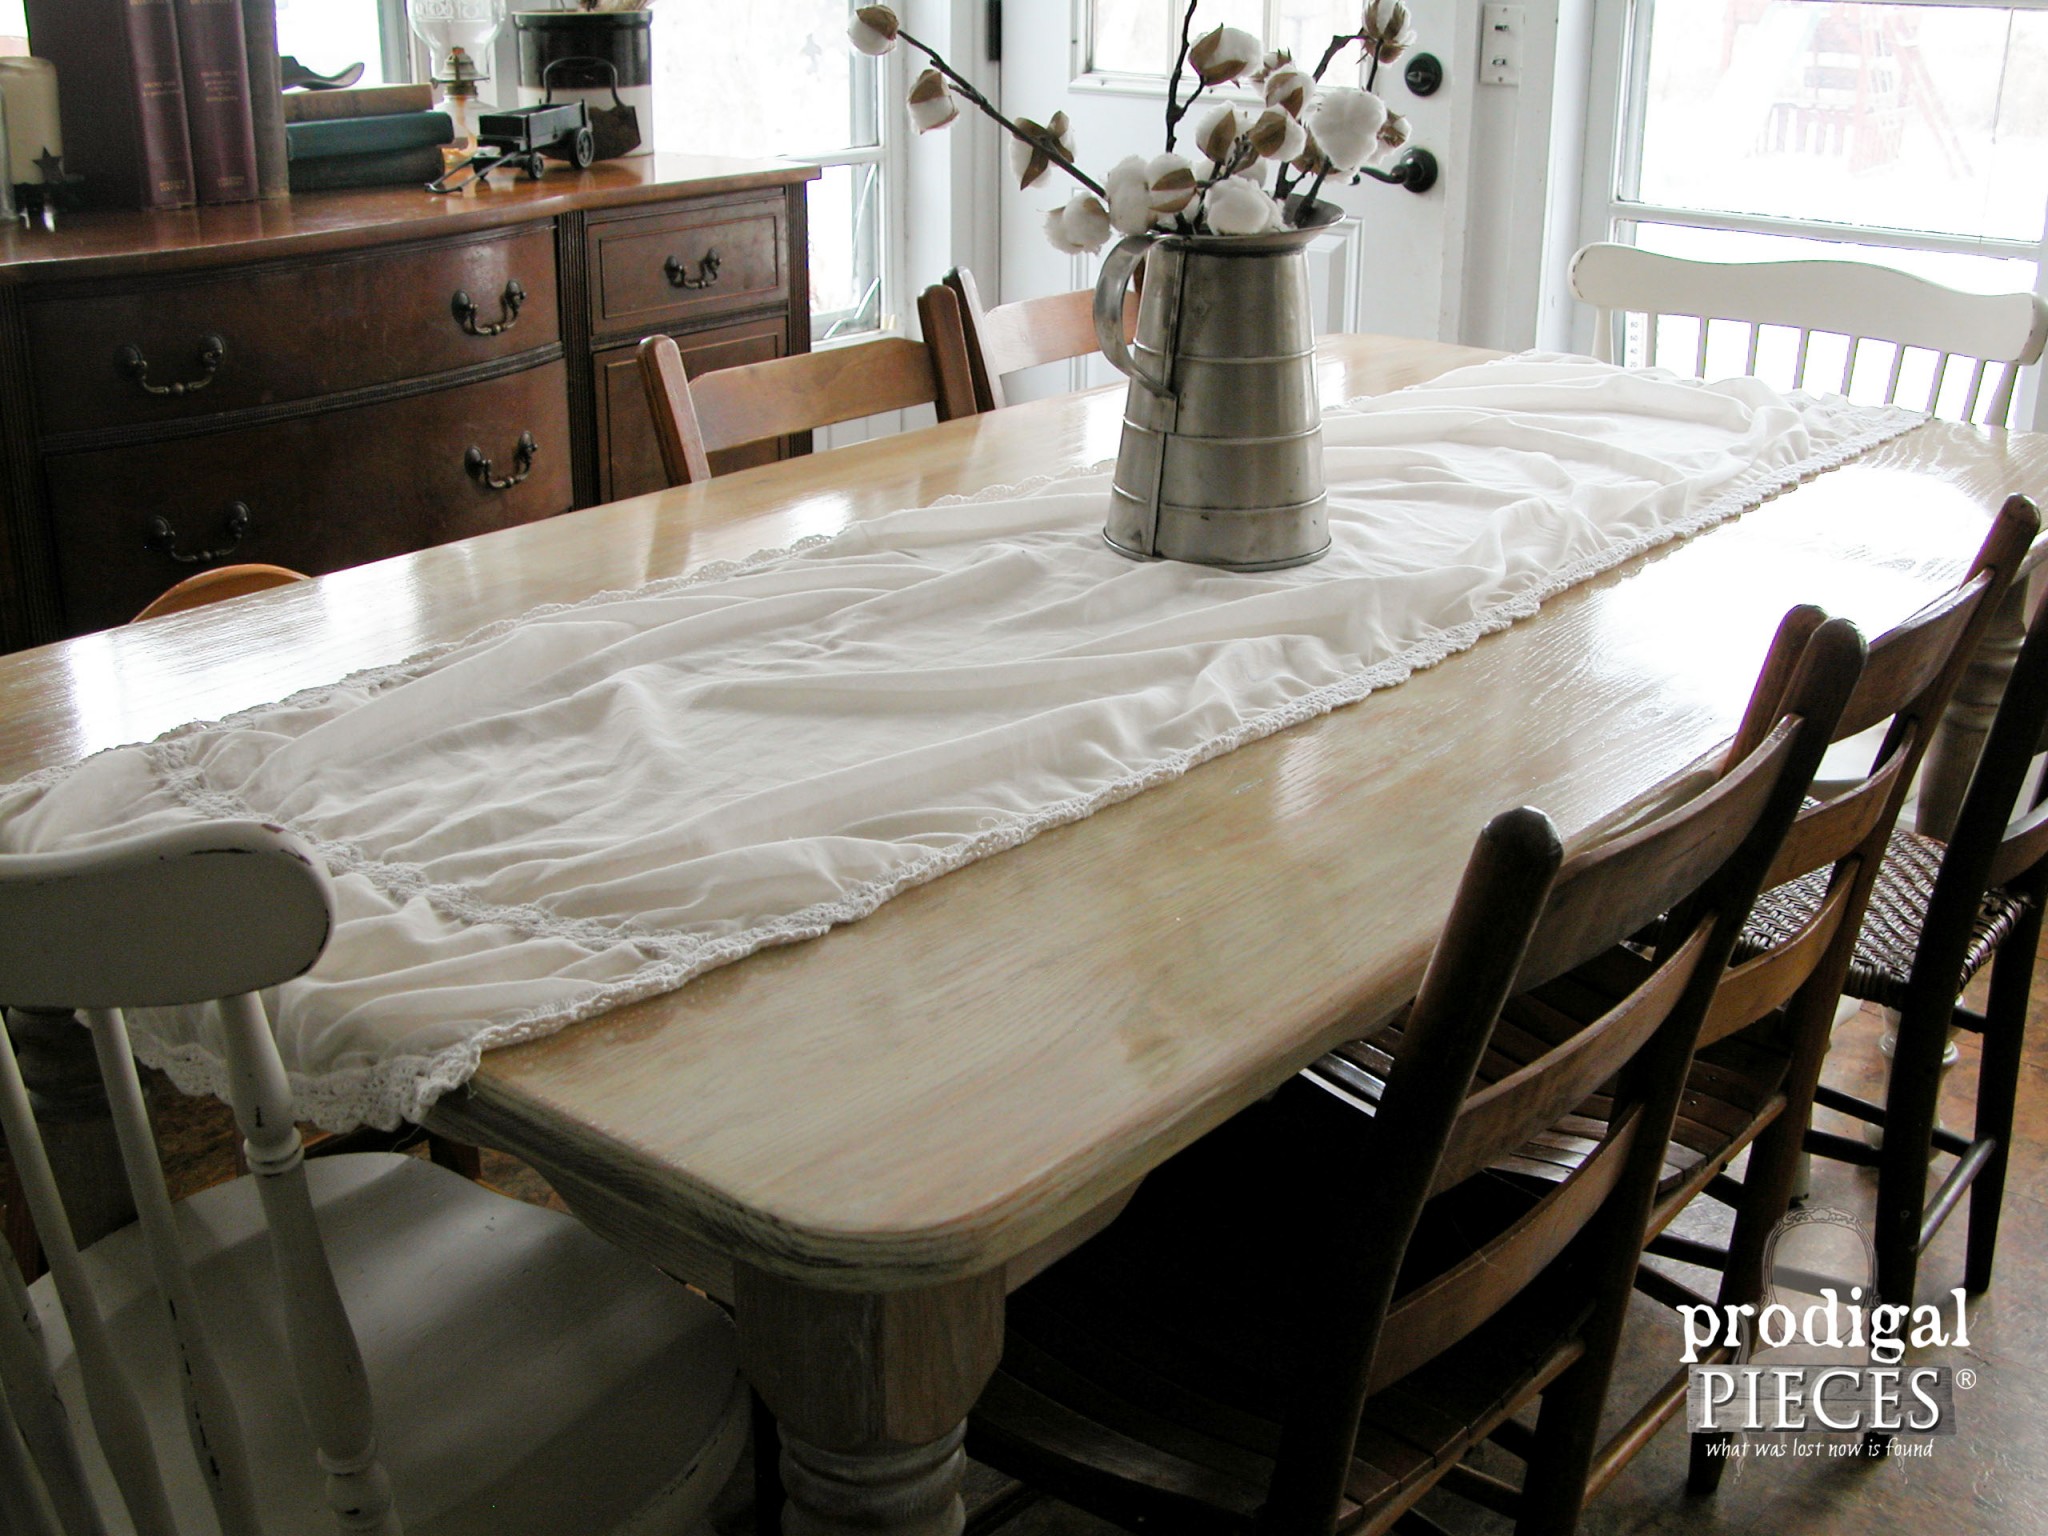 Corner View Whitewashed (Limewashed) Farmhouse Table by Prodigal Pieces | prodigalpieces.com